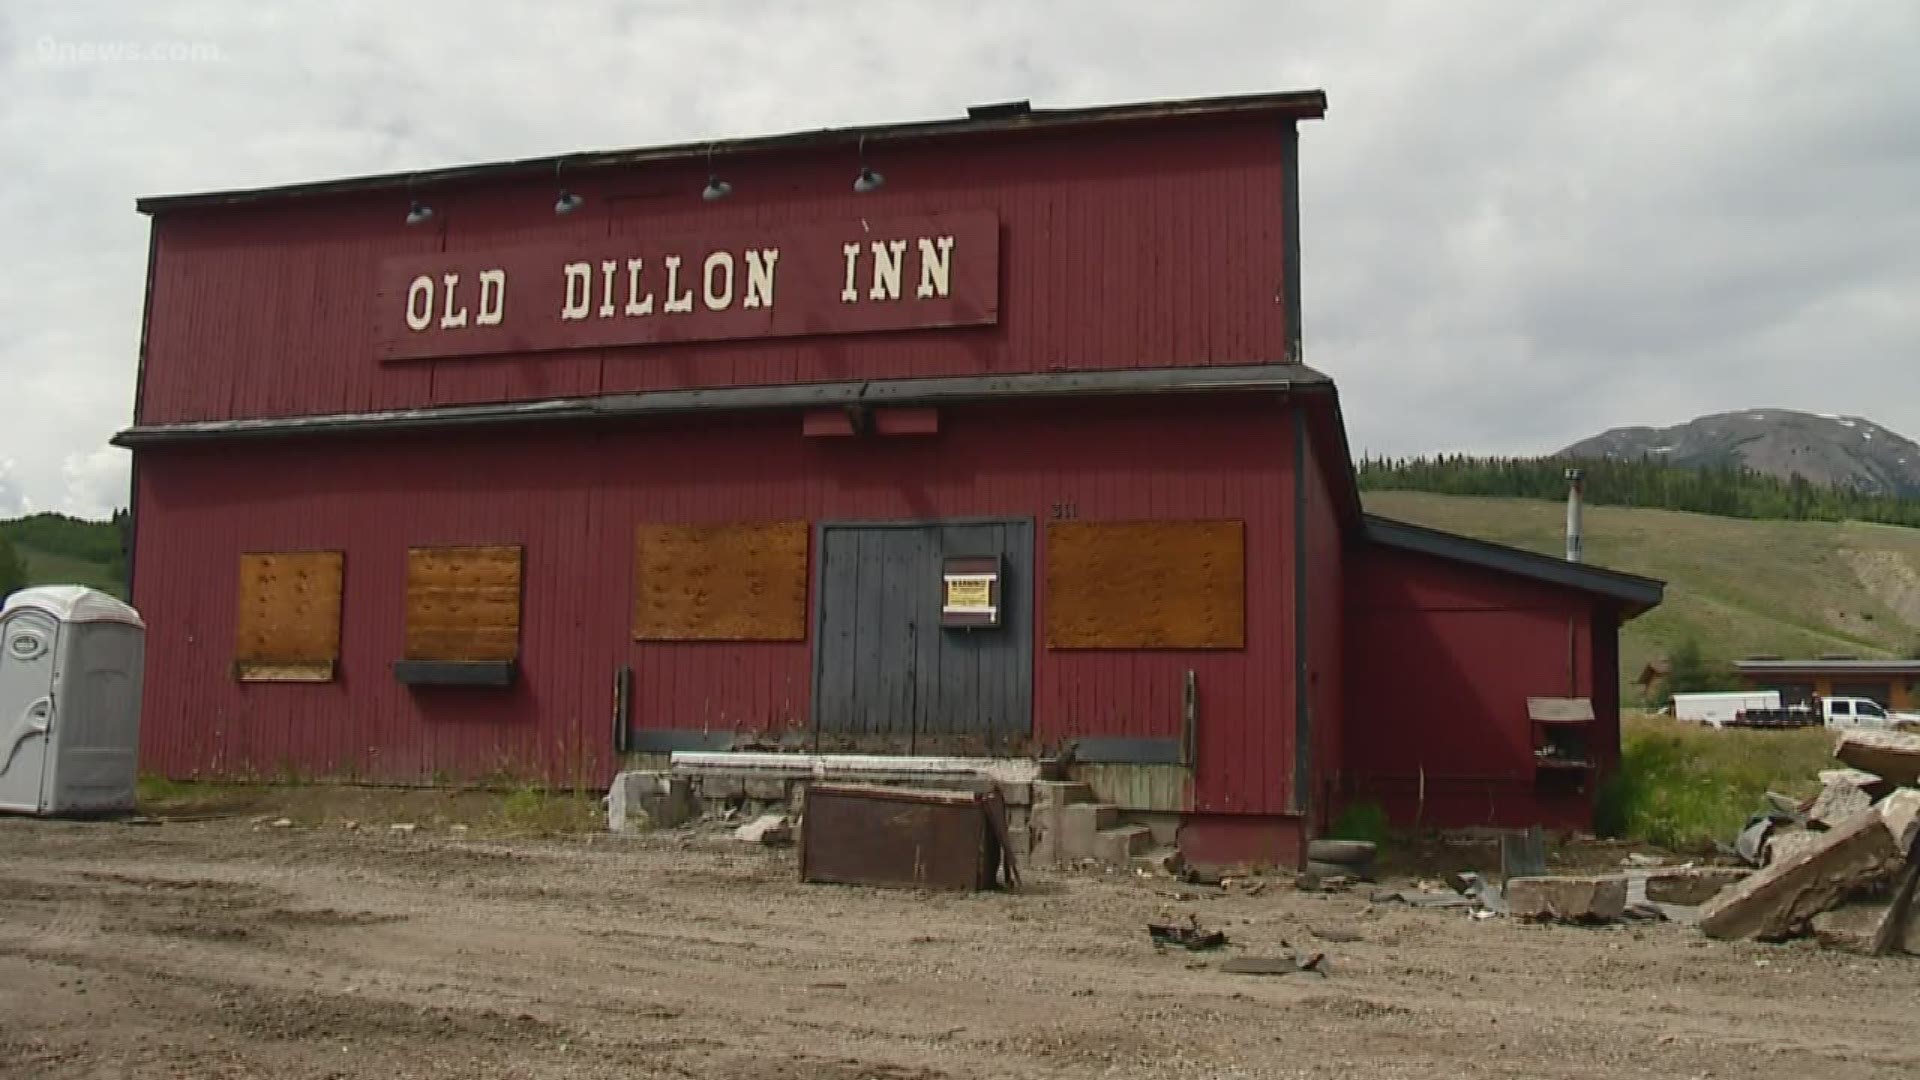 Not many people have seen the inside of the Old Dillon Inn since it closed in 2007.